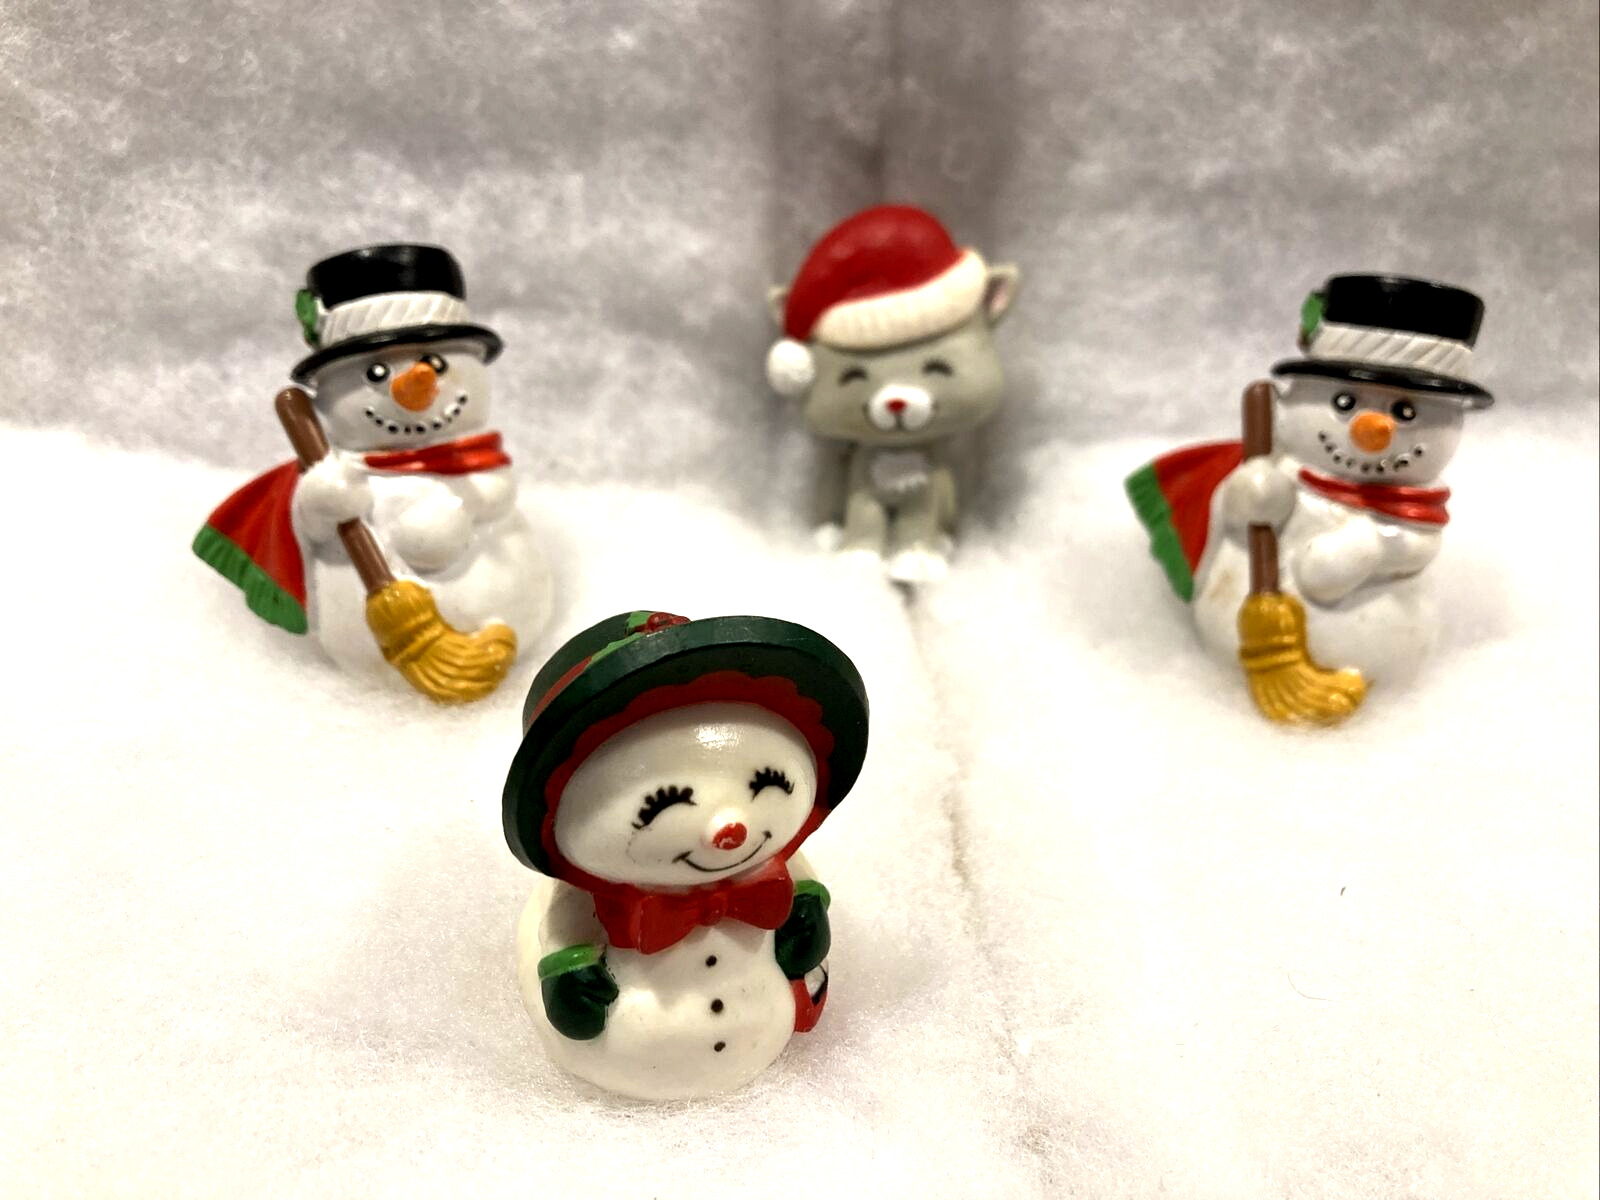 LOT OF 4 Vintage Christmas Snowman Family and Cat 1980 W Berrie Made in Portugal